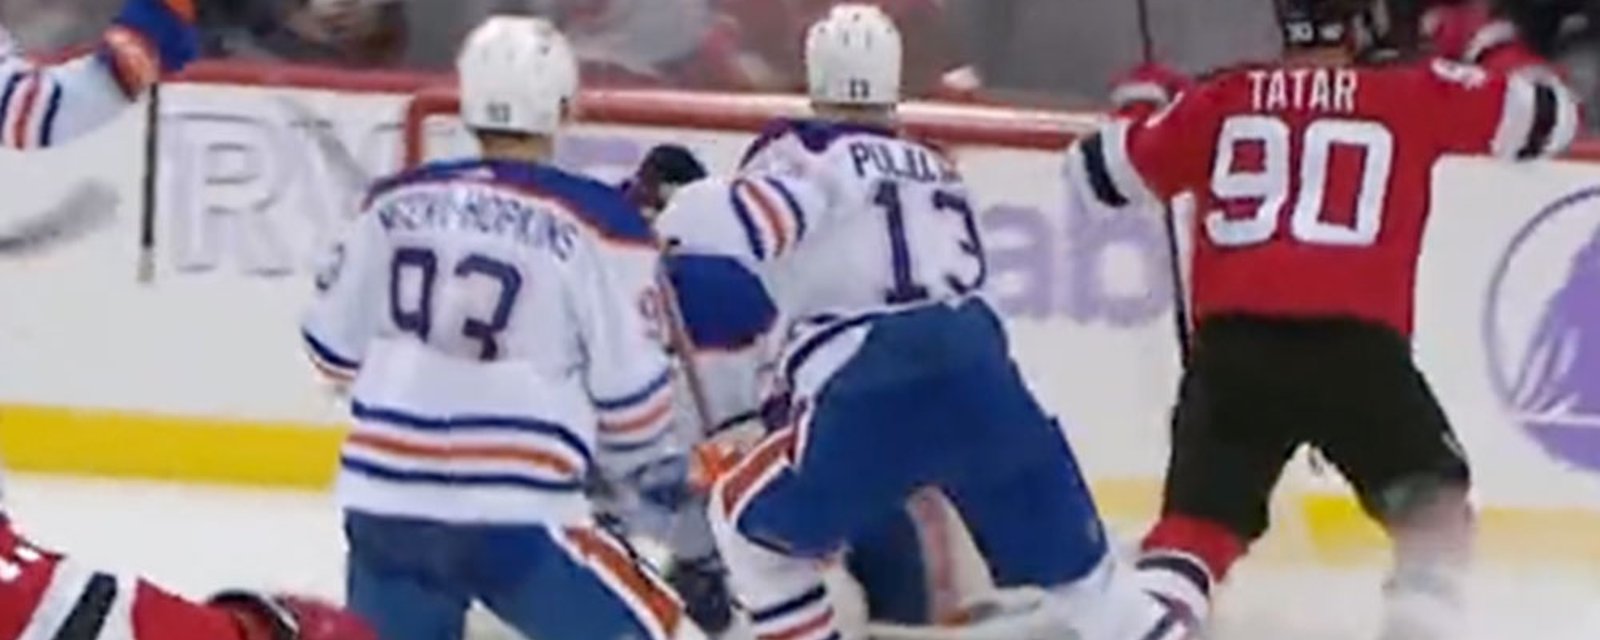 Tatar scores an absolutely ridiculous goal against Oilers